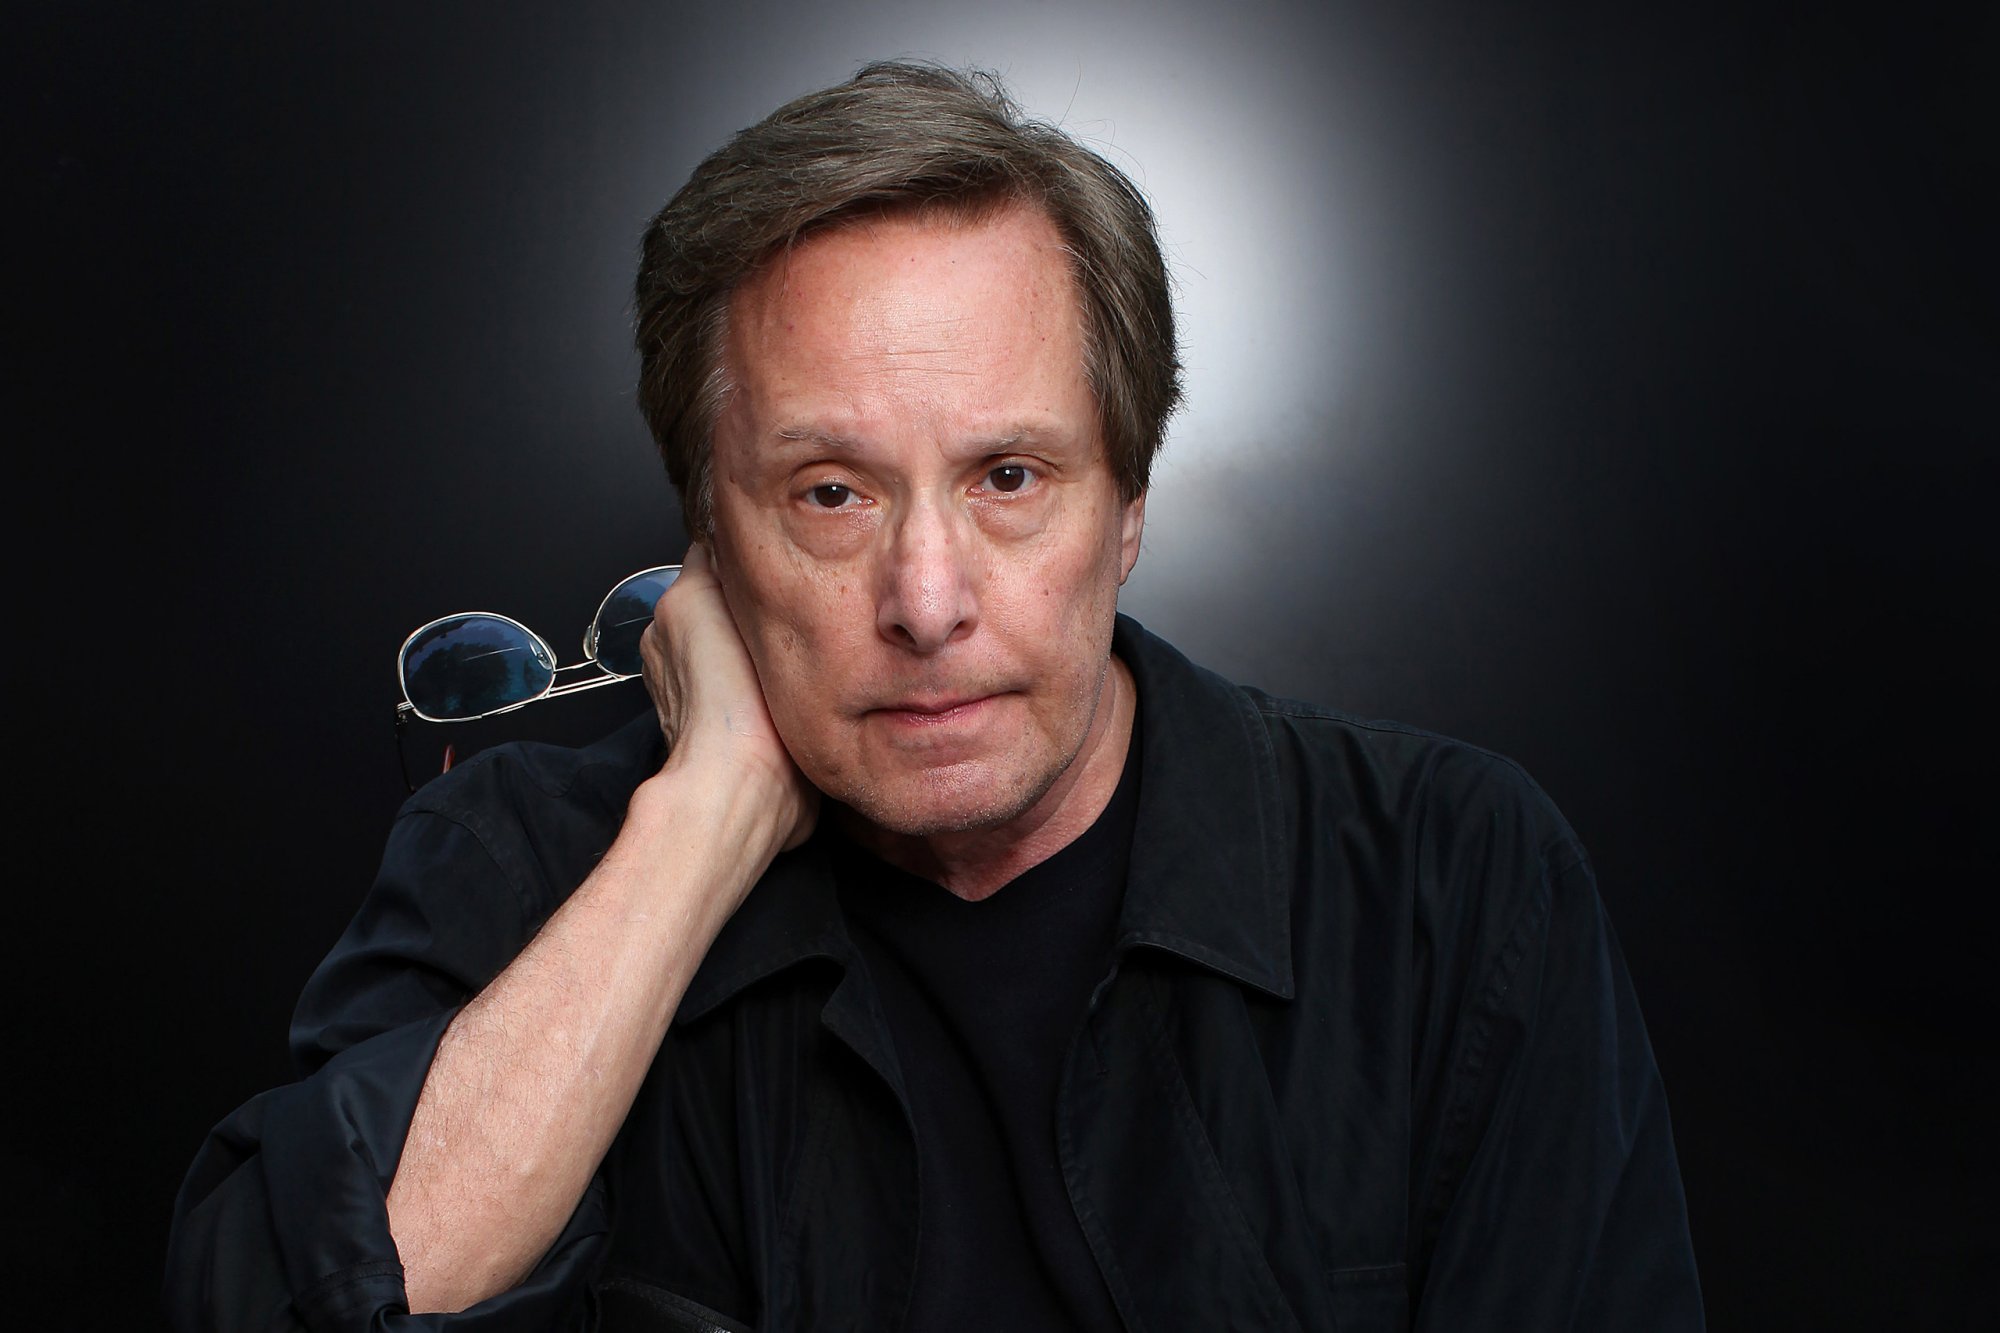 Happy Birthday to WILLIAM FRIEDKIN (Director of THE EXORCIST and BUG) who turns 82 today 